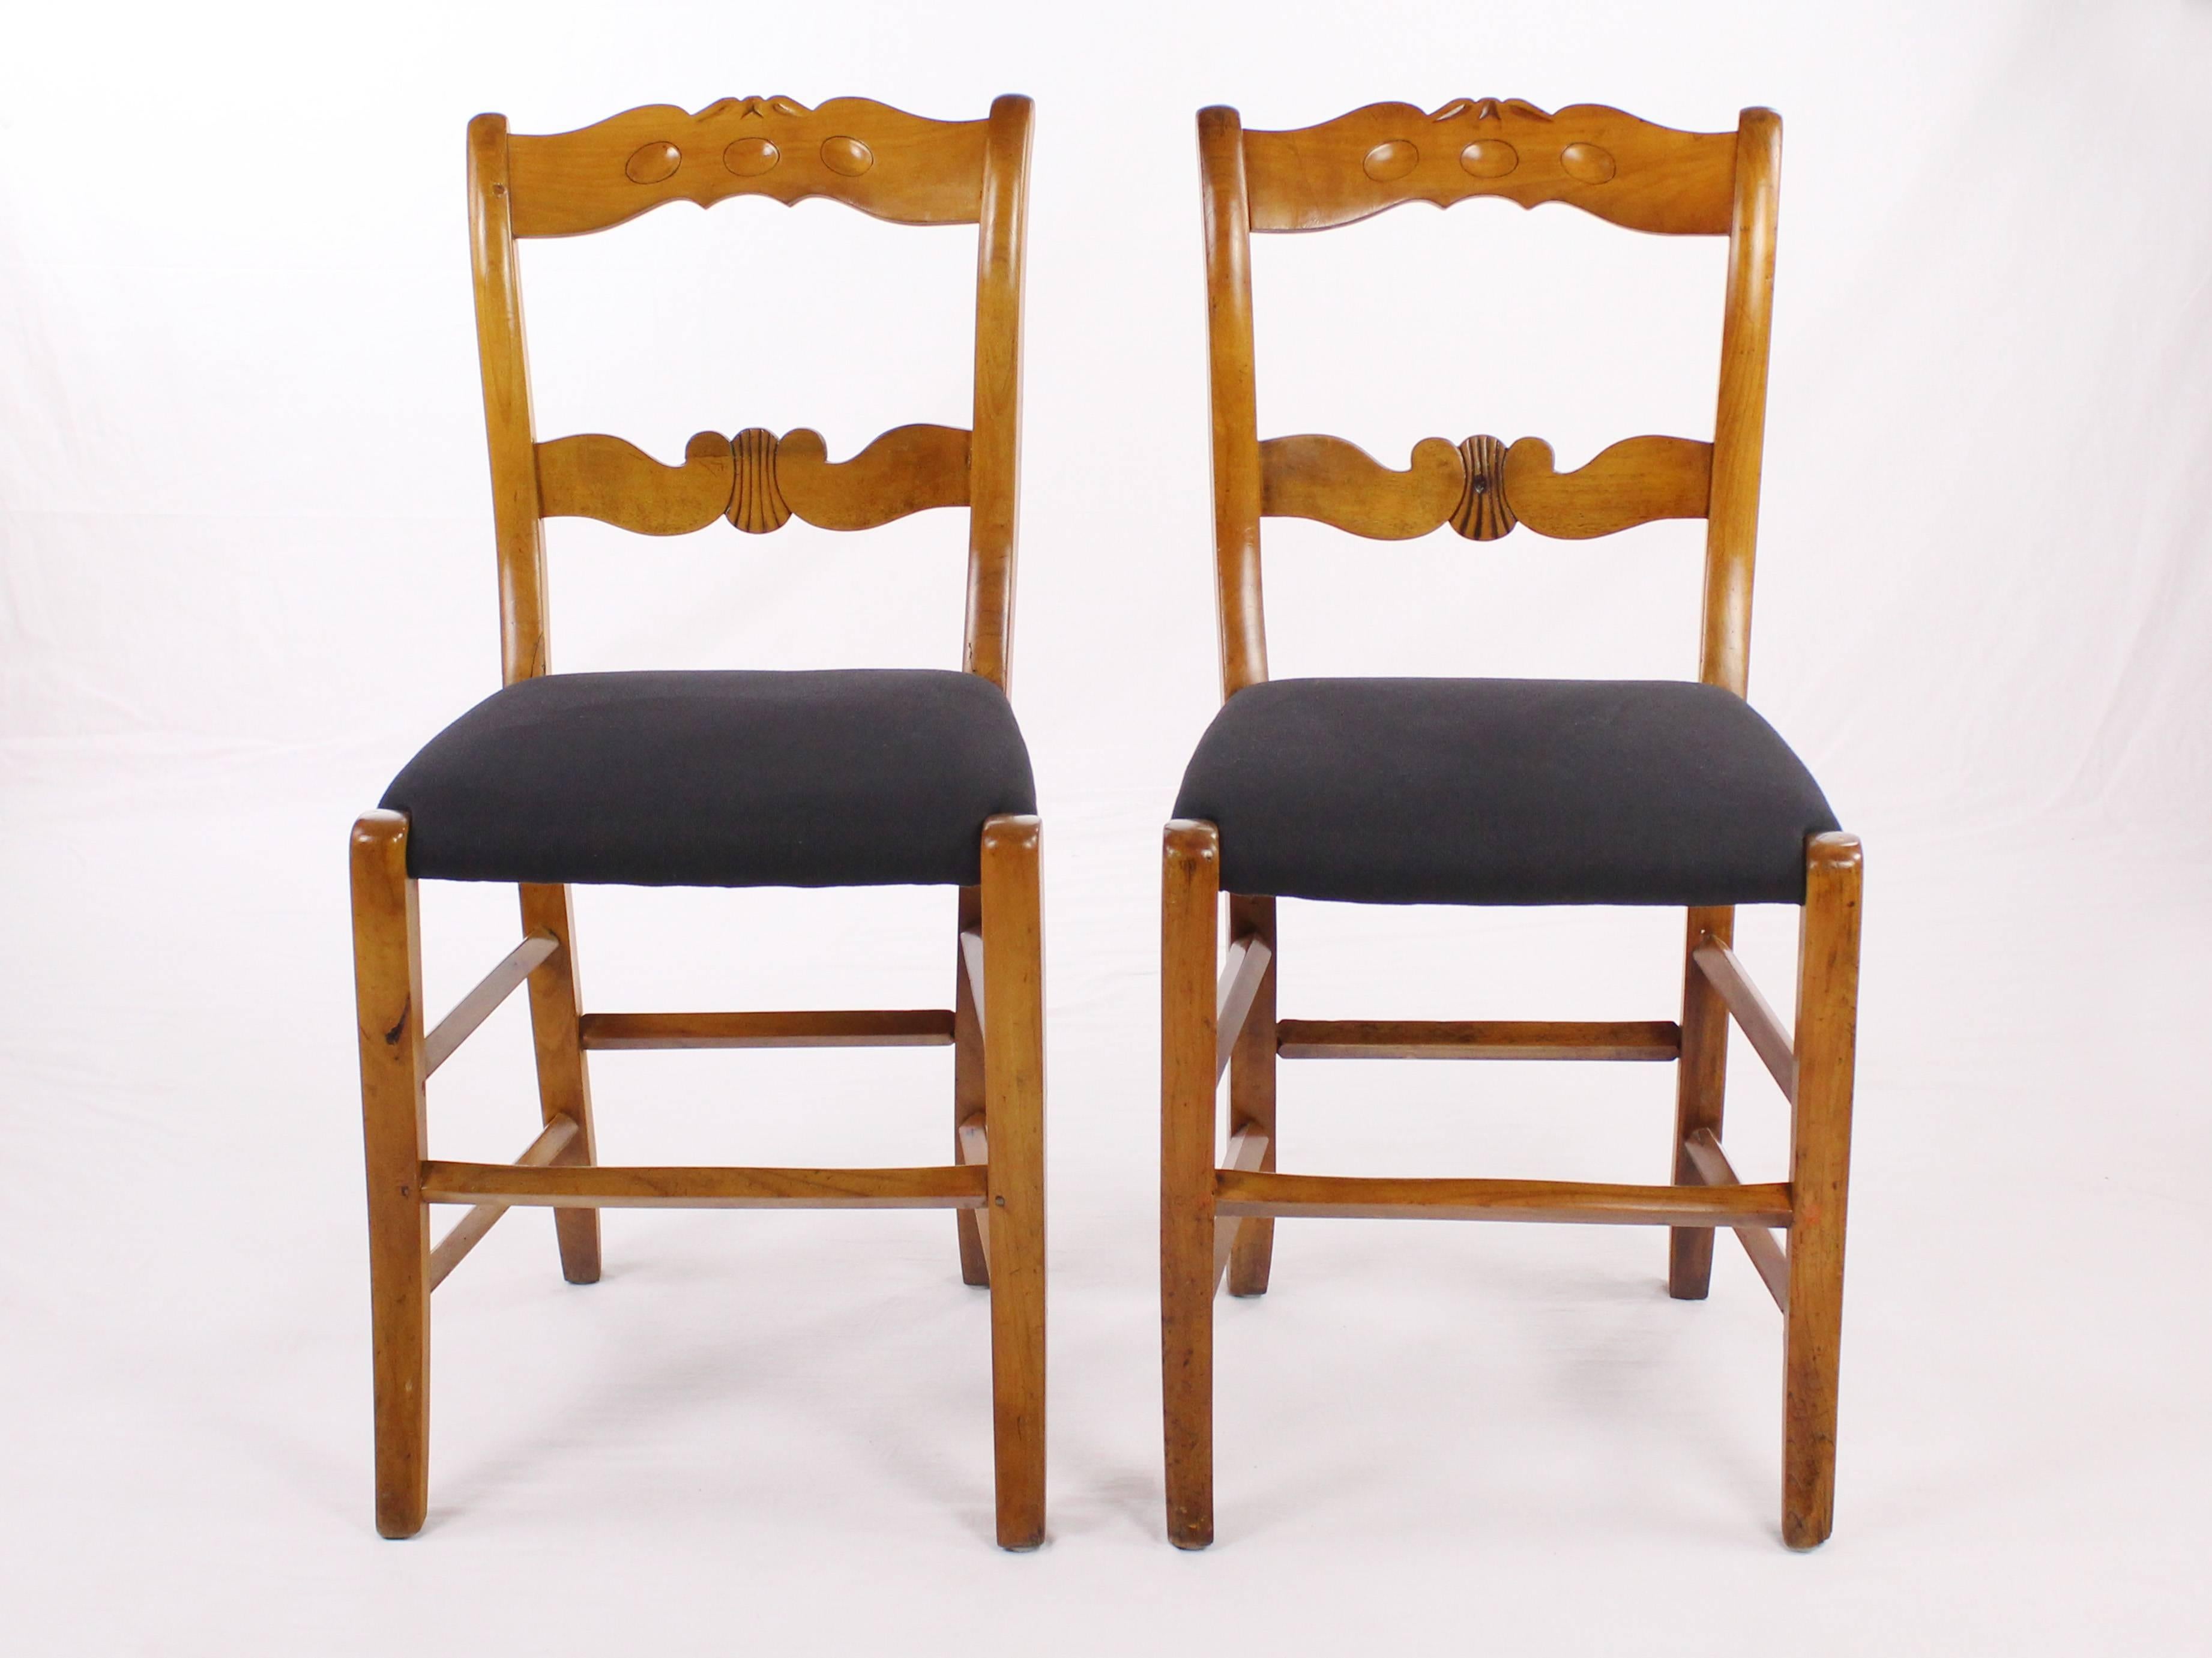 Set of 4 chairs made of solid cherrywood, made around 1830-1840 probably in Hessen or southern Germany. The legs of the chairs are slightly concave. The seat of the chairs was newly upholstered and covered with a black cotton fabric. The backrests